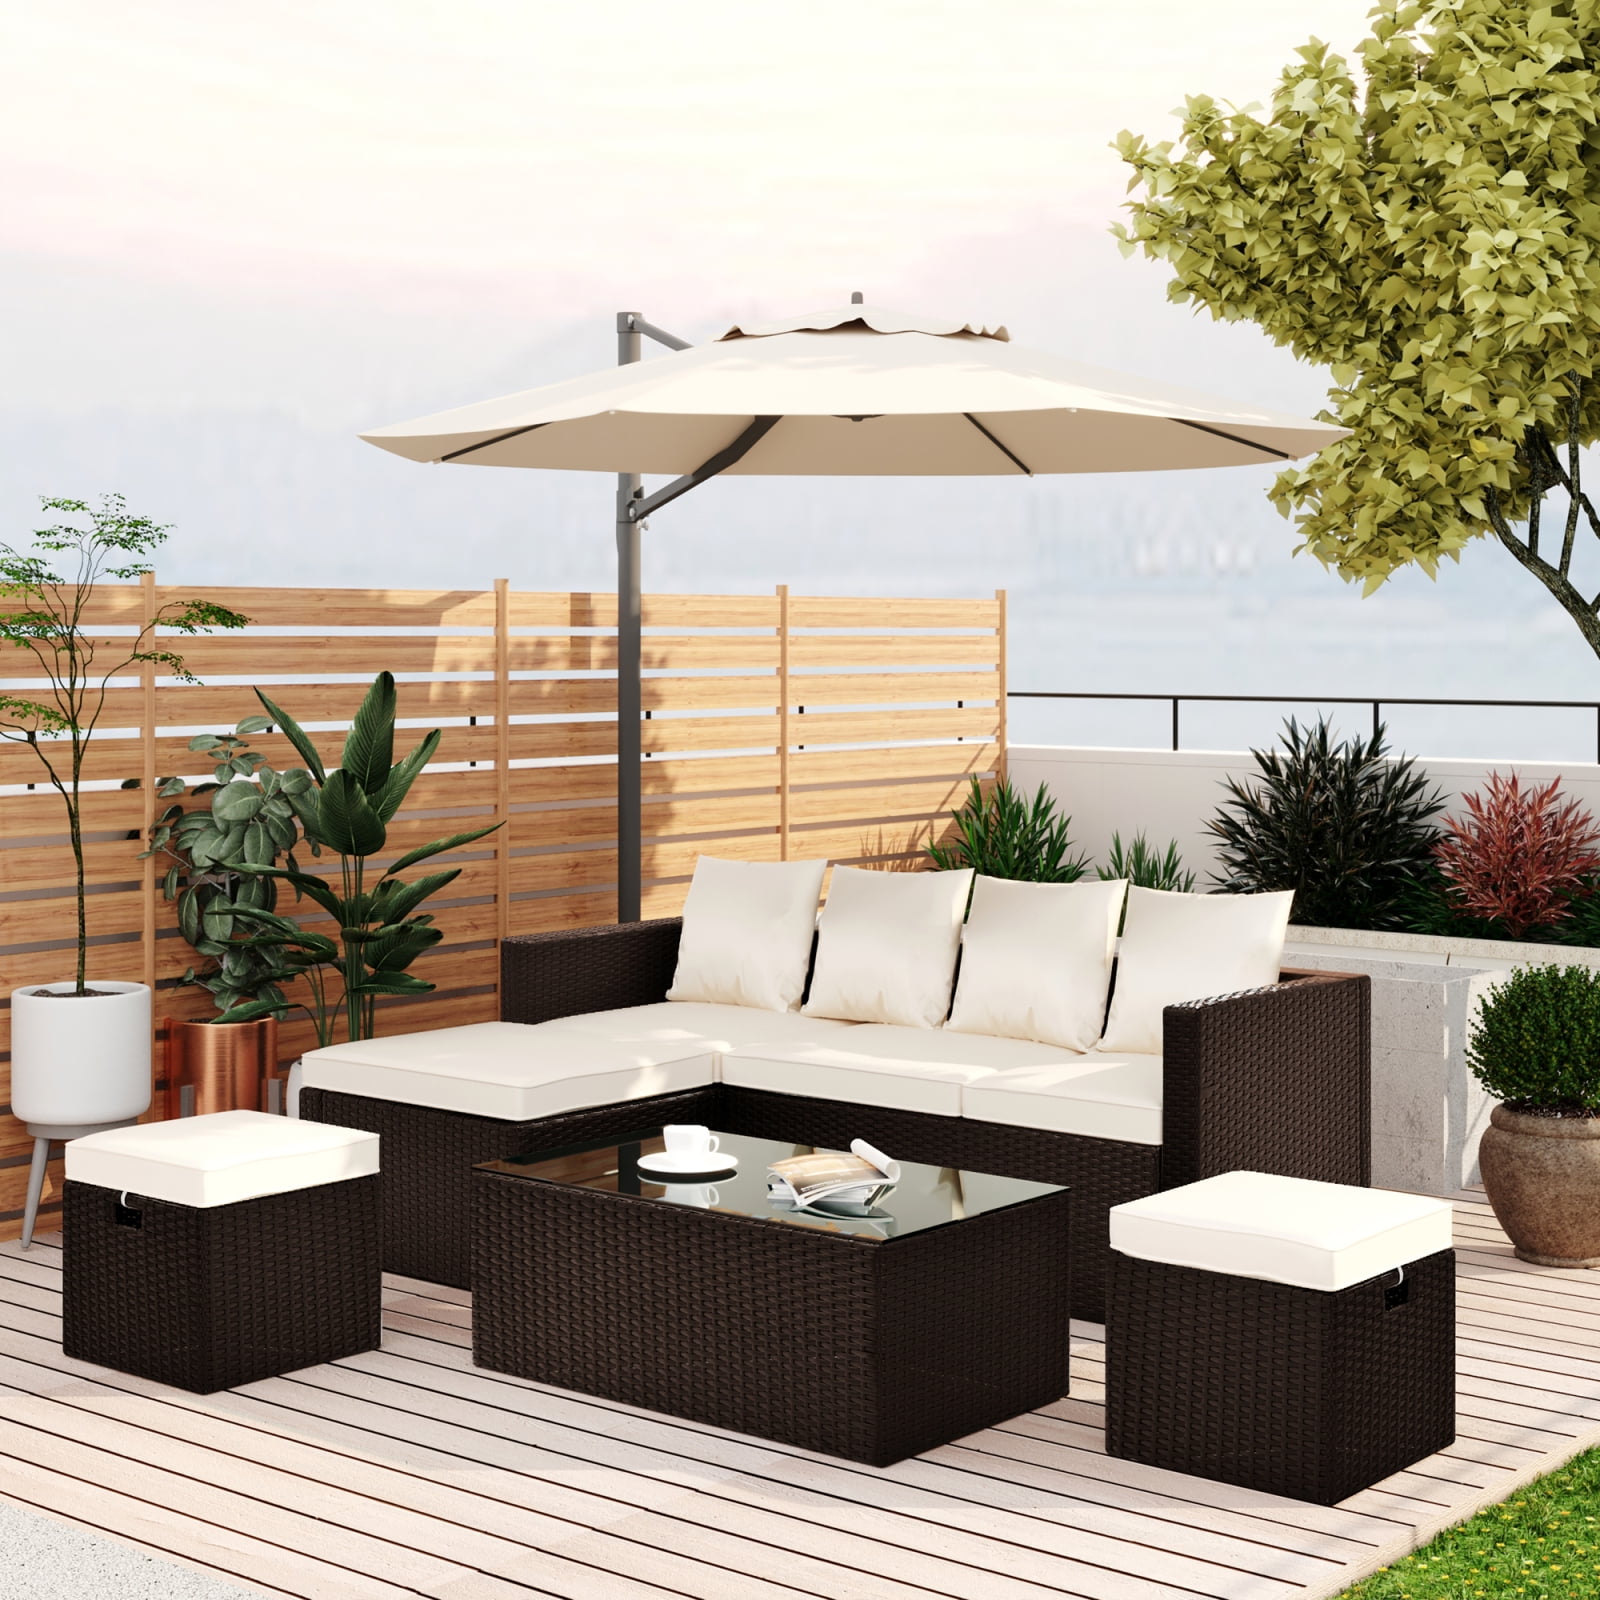 Pannow 5 Piece Patio Furniture Pe Rattan Wicker Sectional Lounger Sofa Set With Glass Table And Adjustable Chair Outdoor Furniture Furniture Stores Near Me Furniture Sets Brown Beige Walmart Com